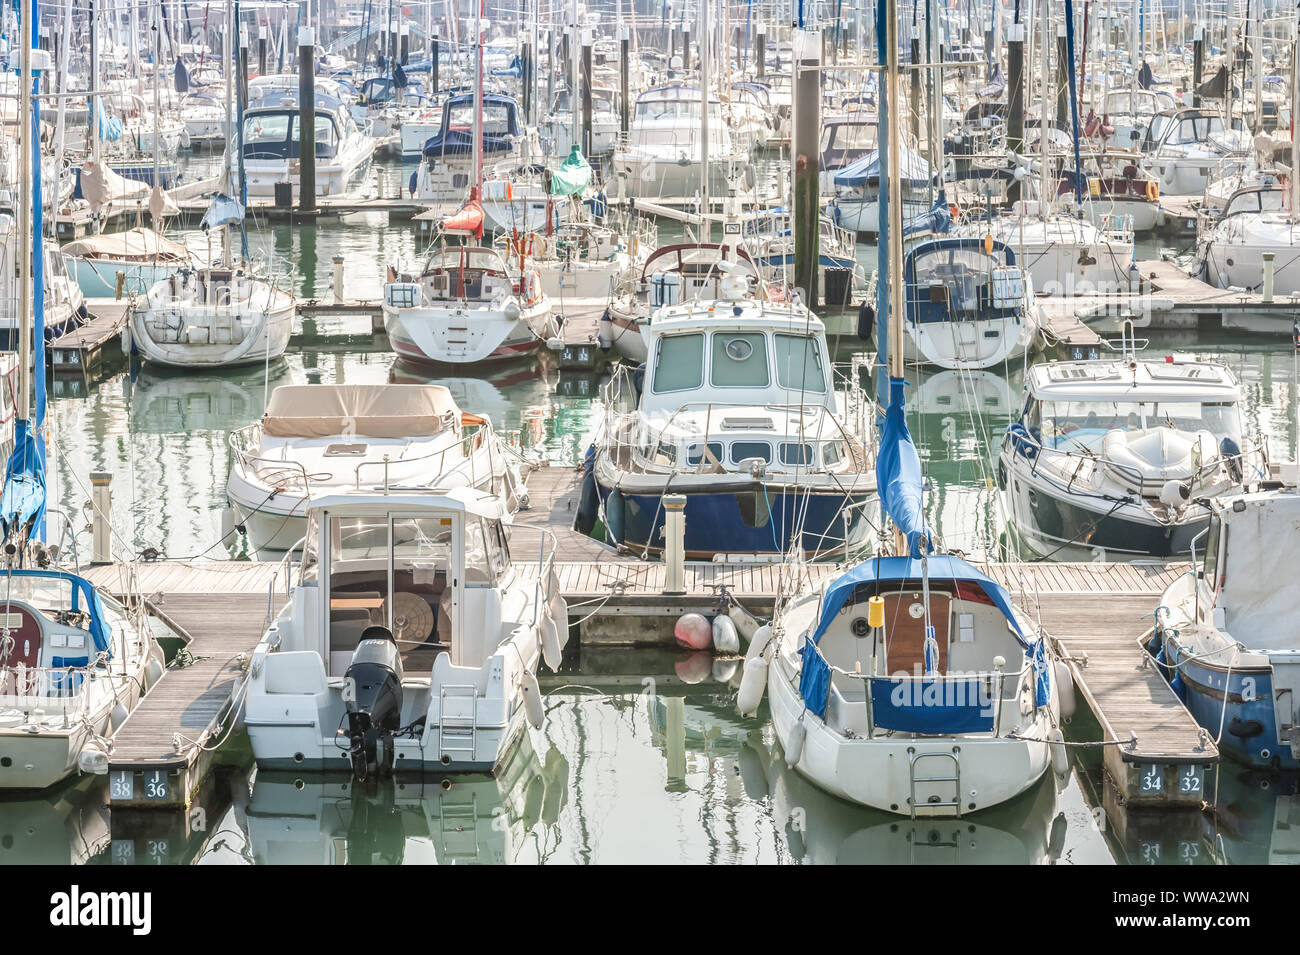 crowded boating marina with lots of yachts and small pleasure craft - no product identification or names Stock Photo